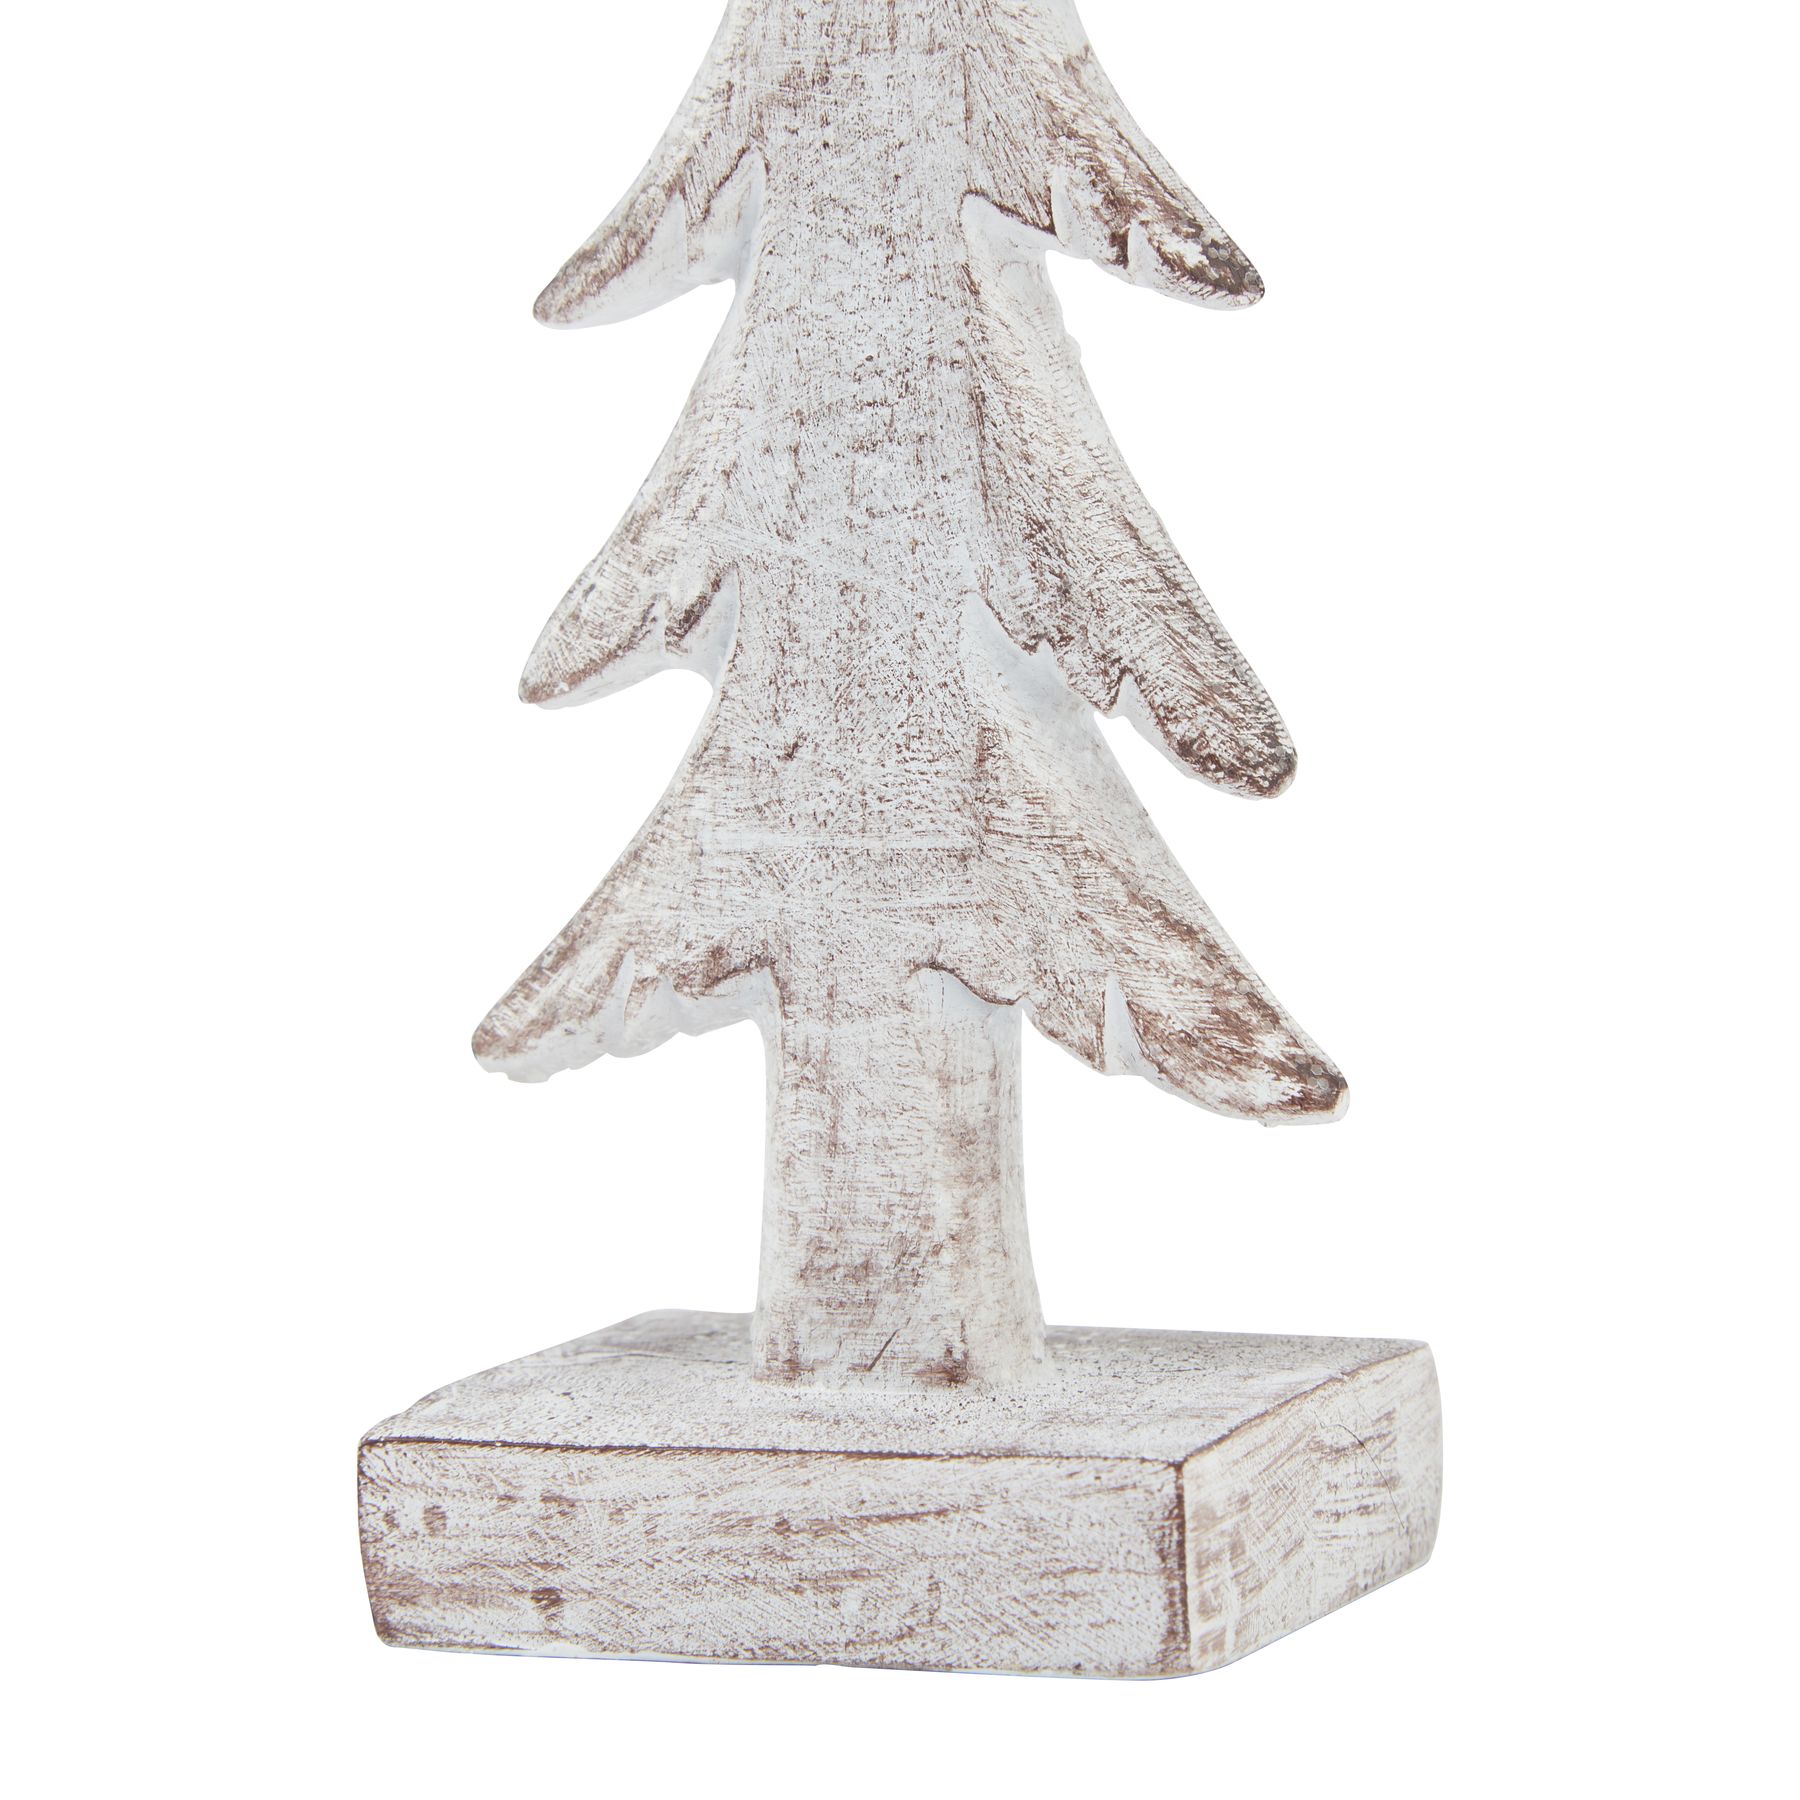 Small Snowy Forest Tree Sculpture - Image 2